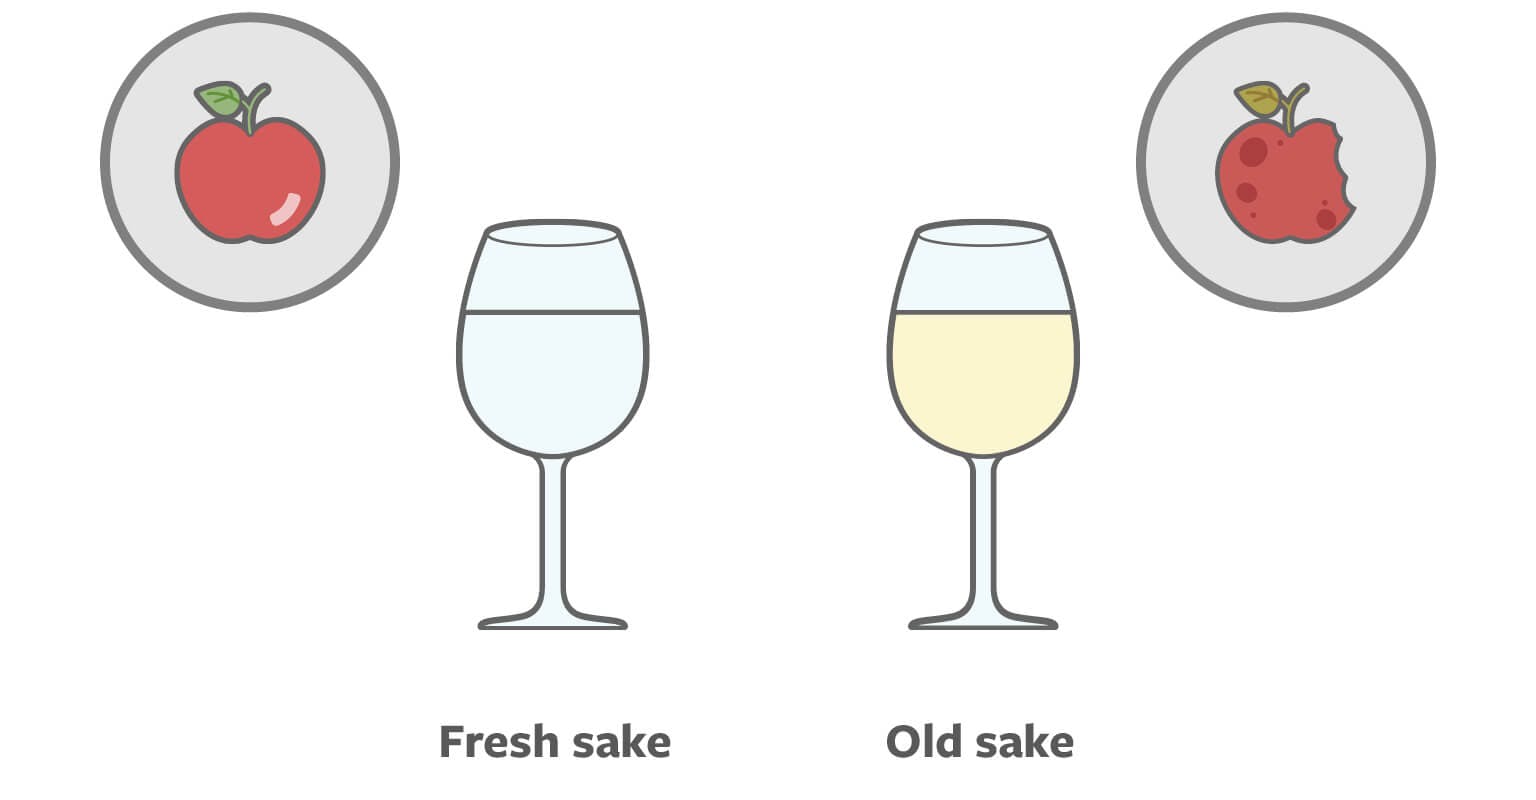 Difference between fresh and old sake taste